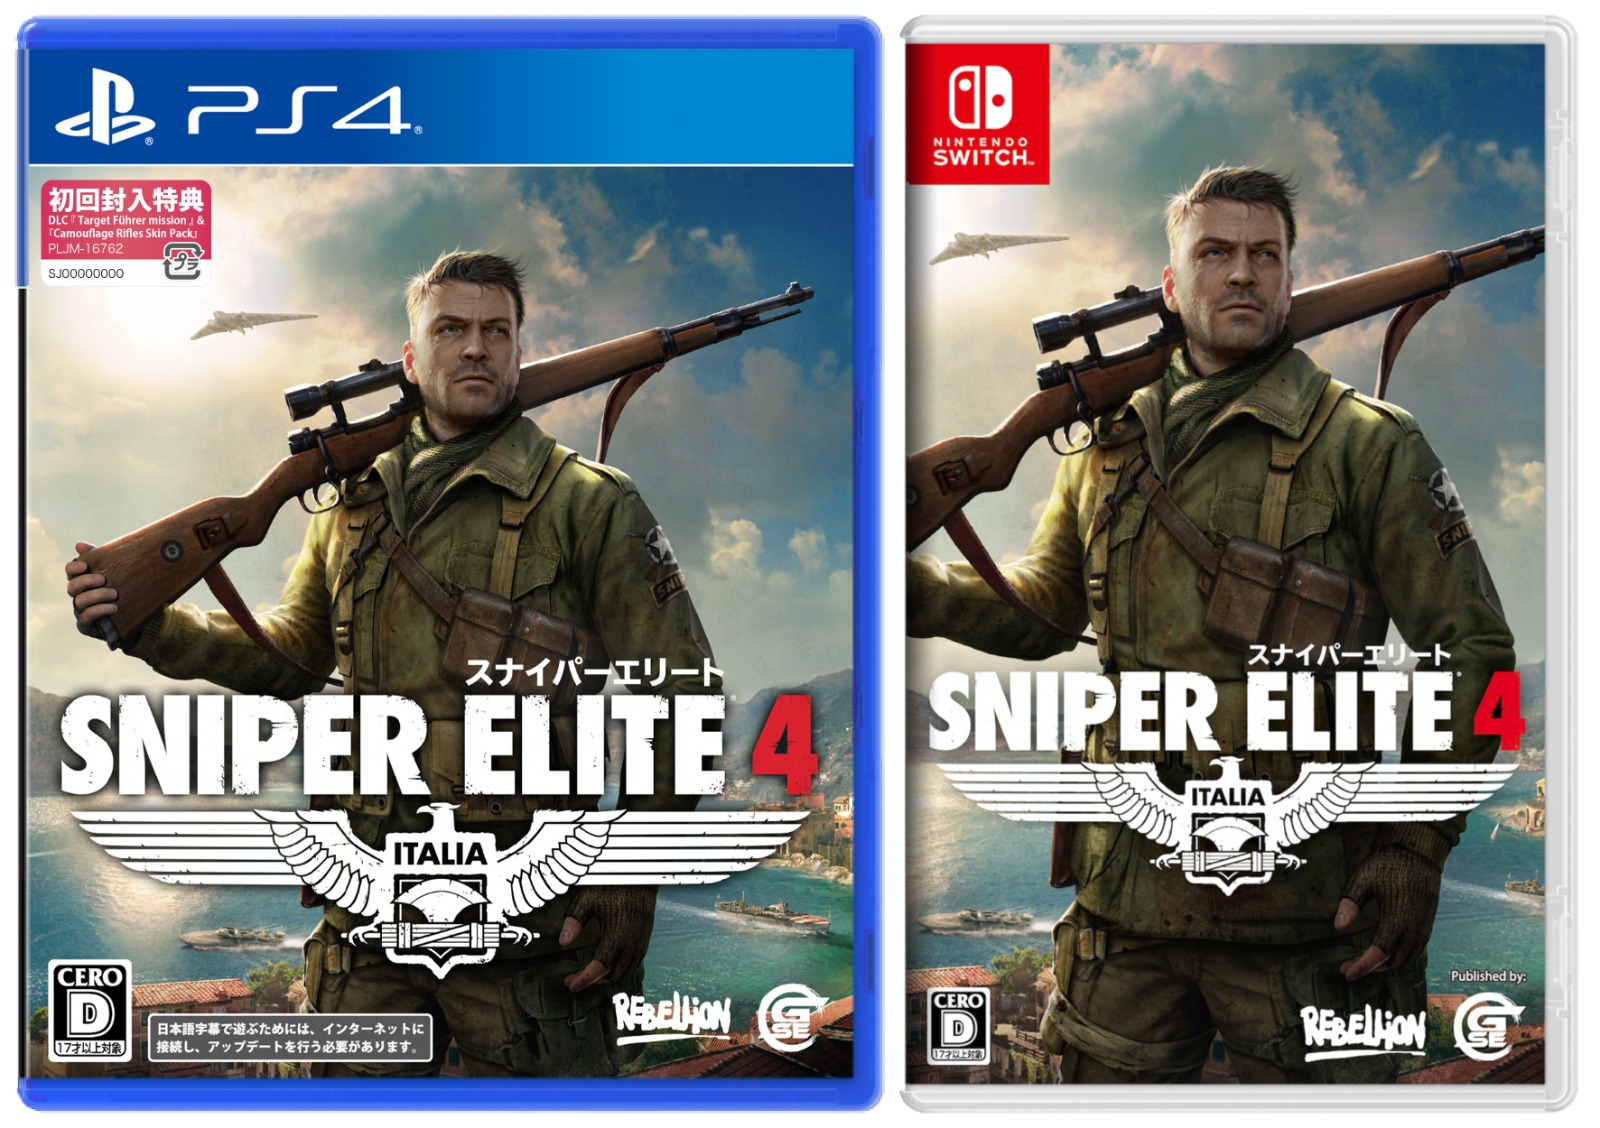 SNIPER ELITE 4,PS4,NS,Rebellion,Sold Out,GSE,